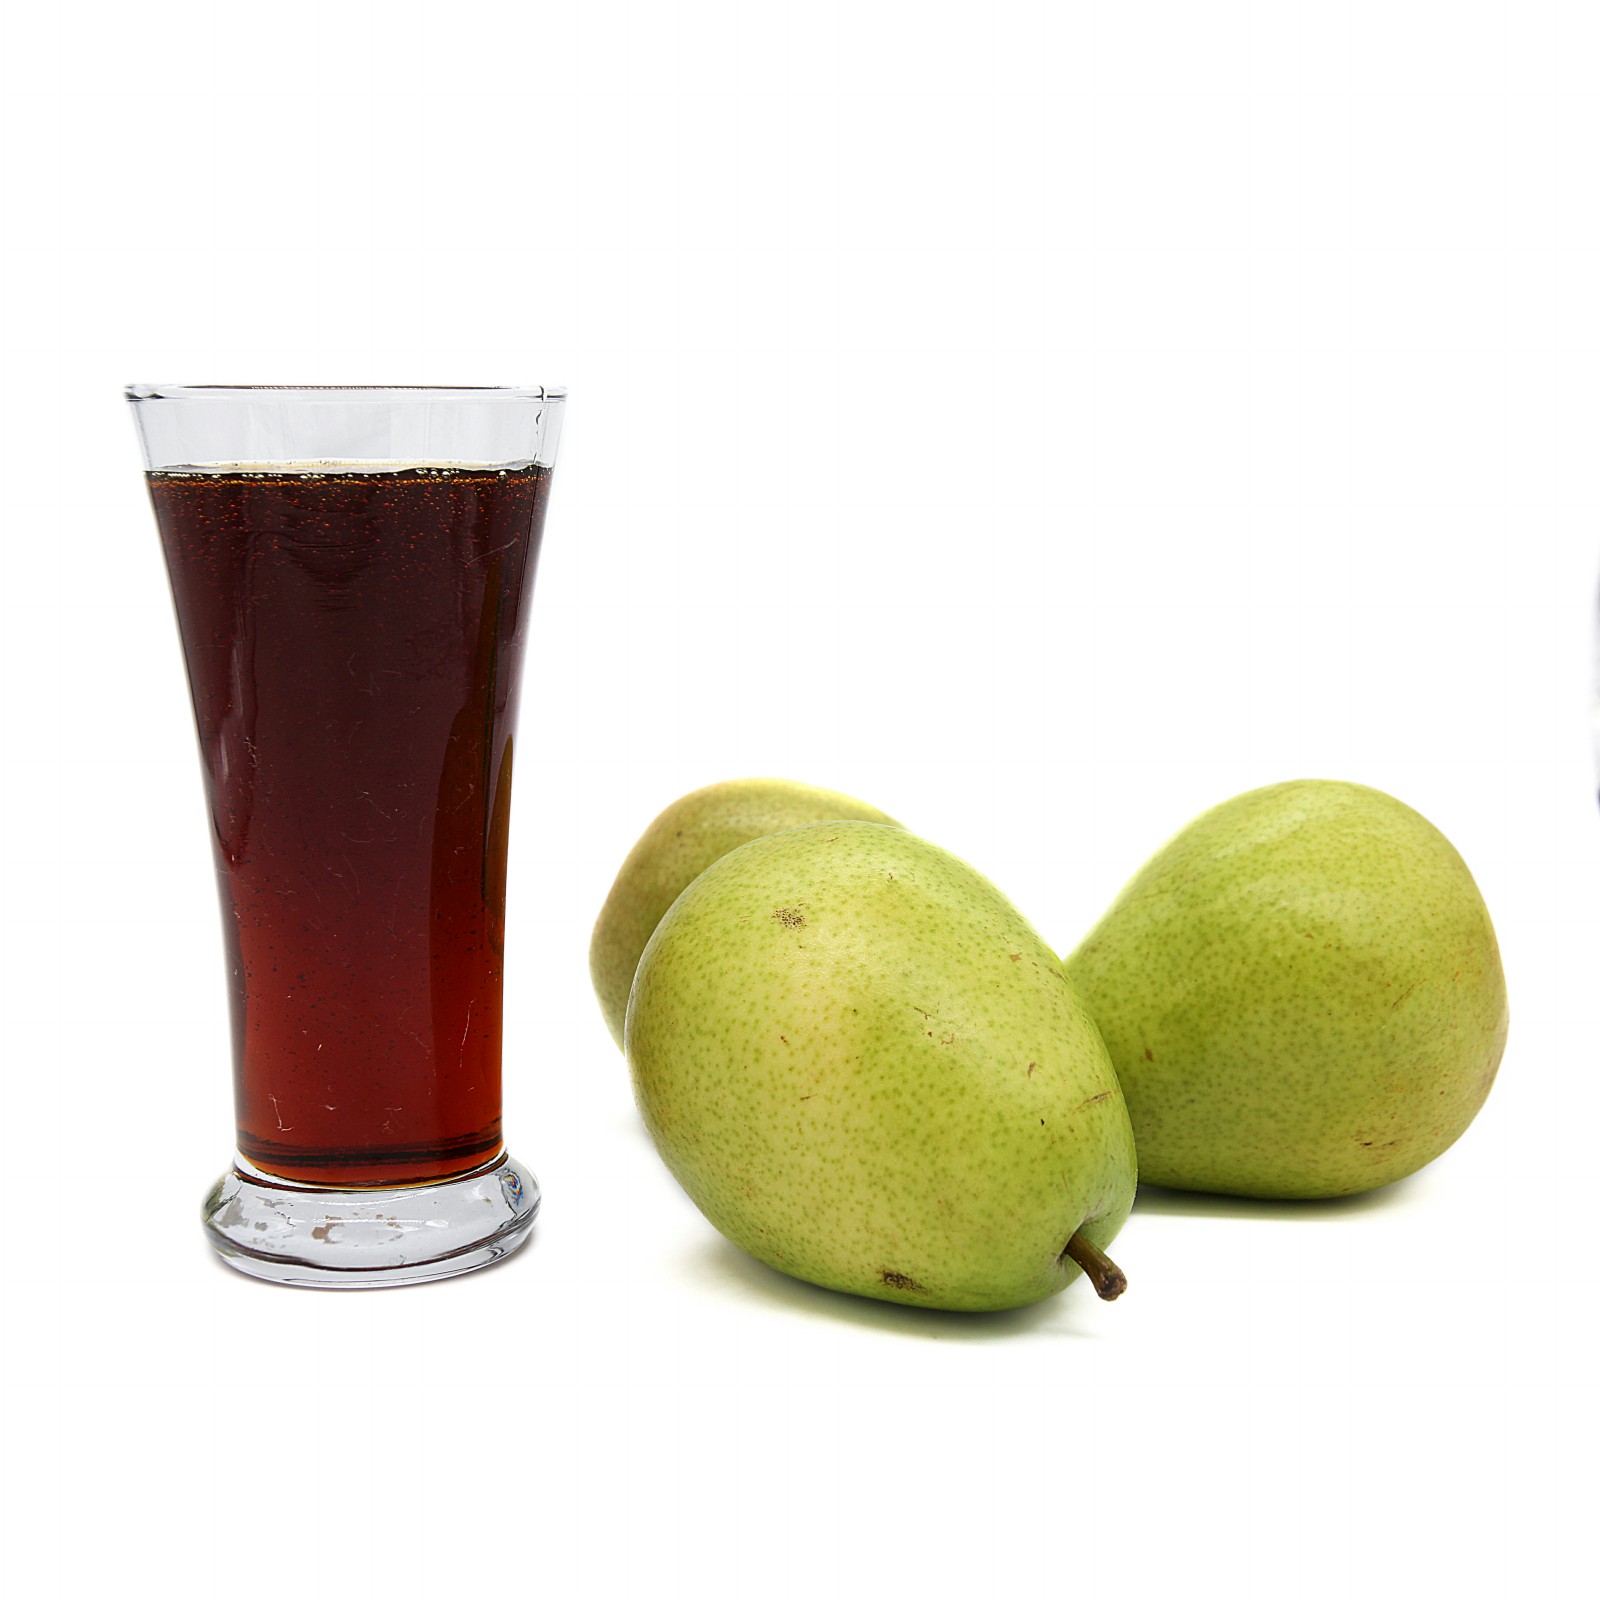 Pear juice concentrate